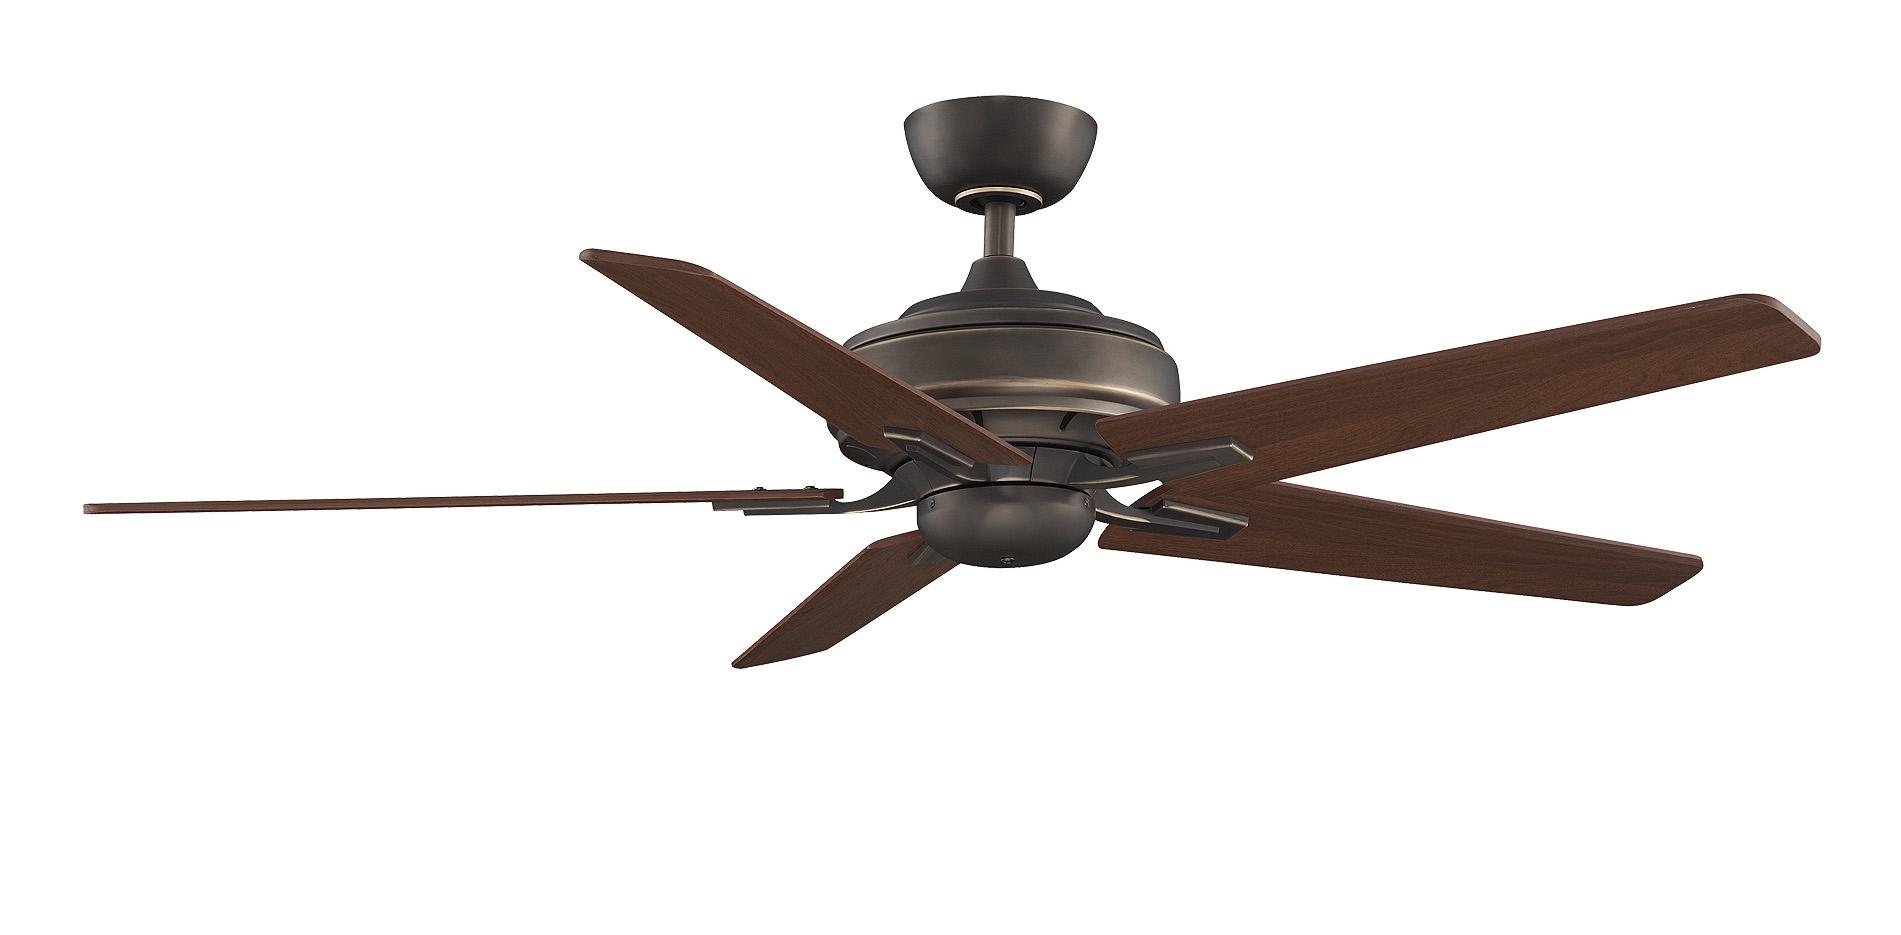 Ceiling Fan Without Light1901 X 935